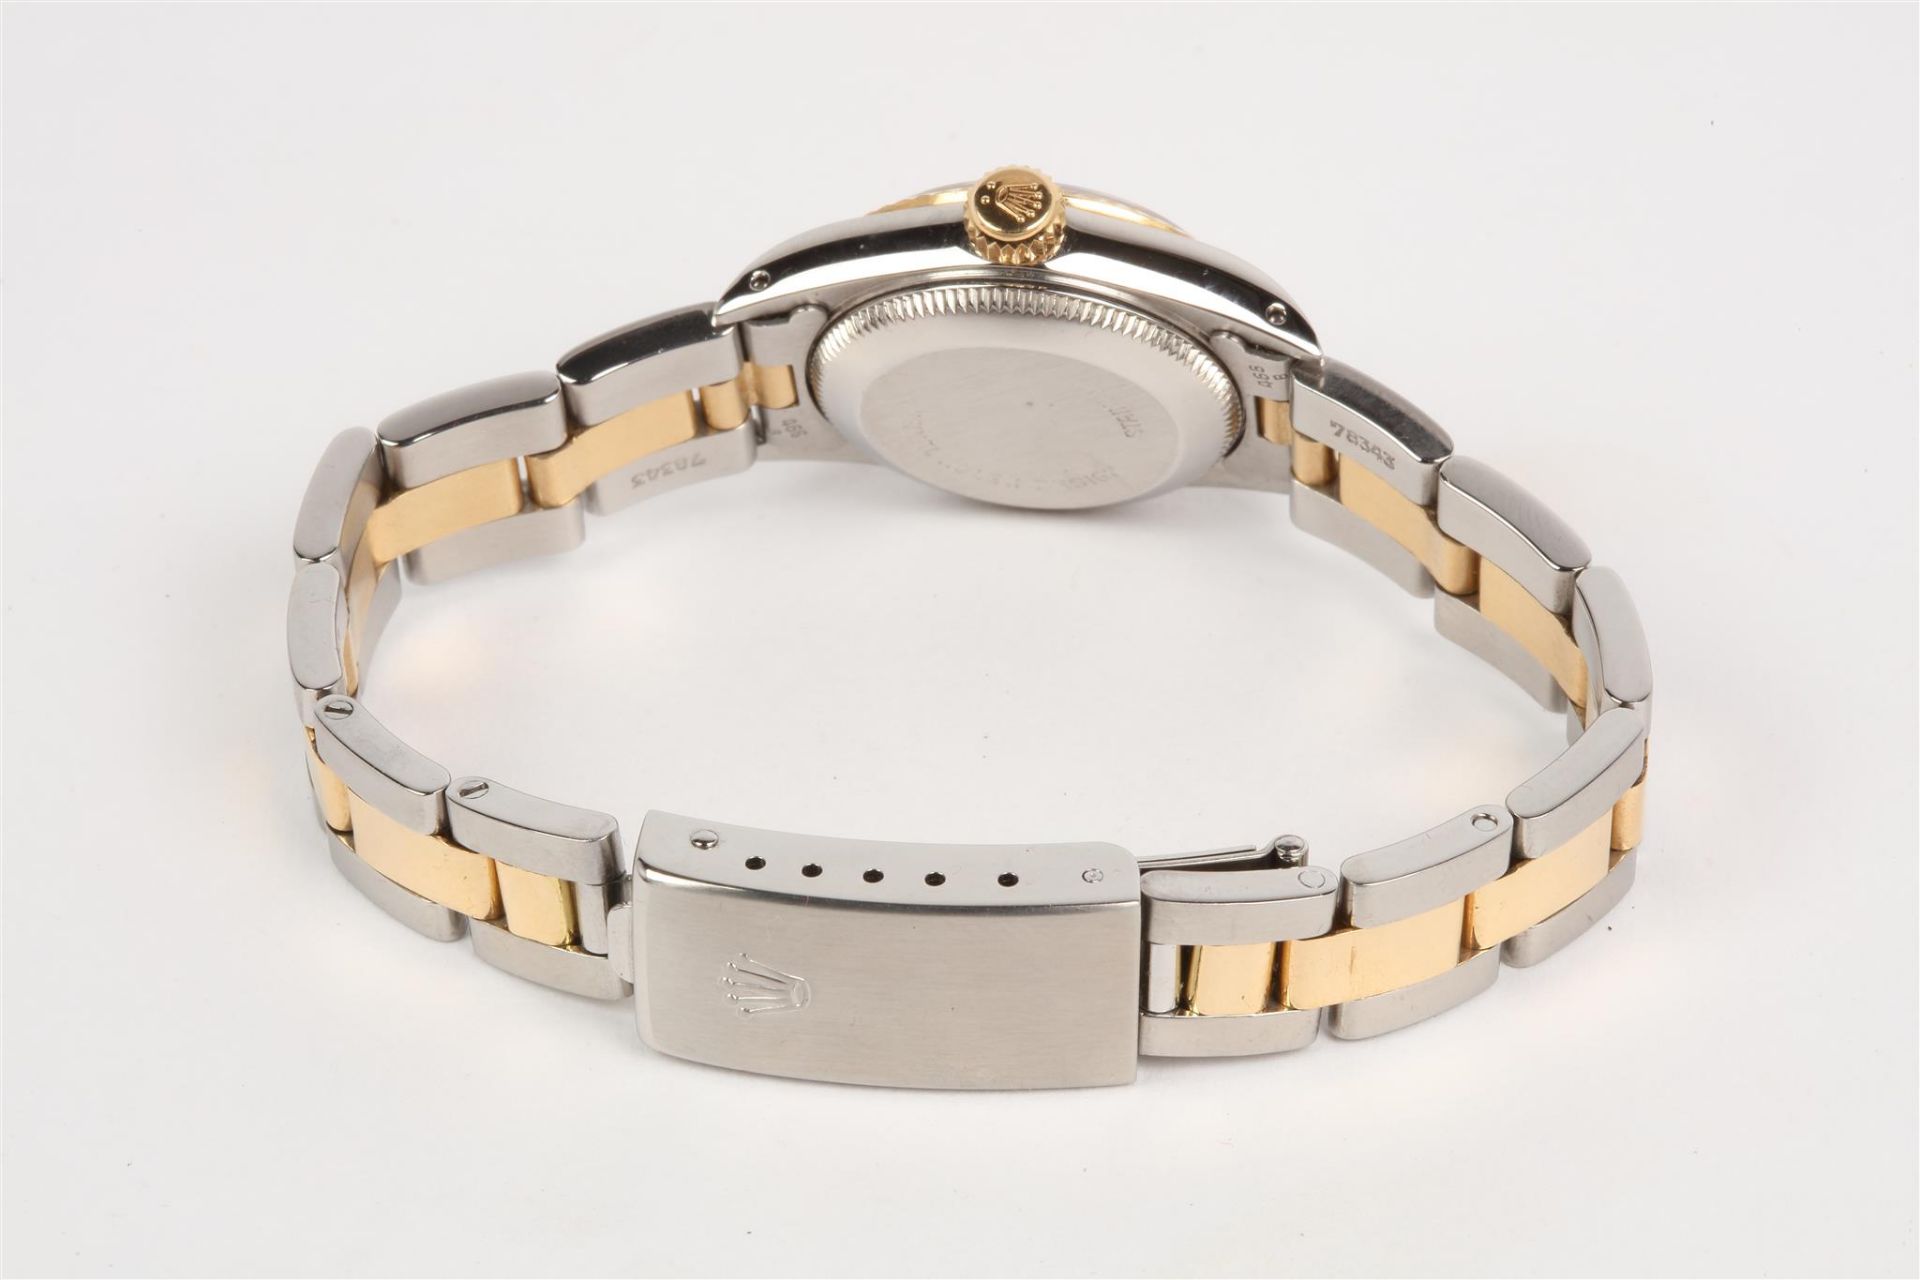 No VAT Ladies Rolex Oyster Perpetual Watch - Model 67193 - Gold & Stainless Steel Strap With Gold - Image 4 of 4